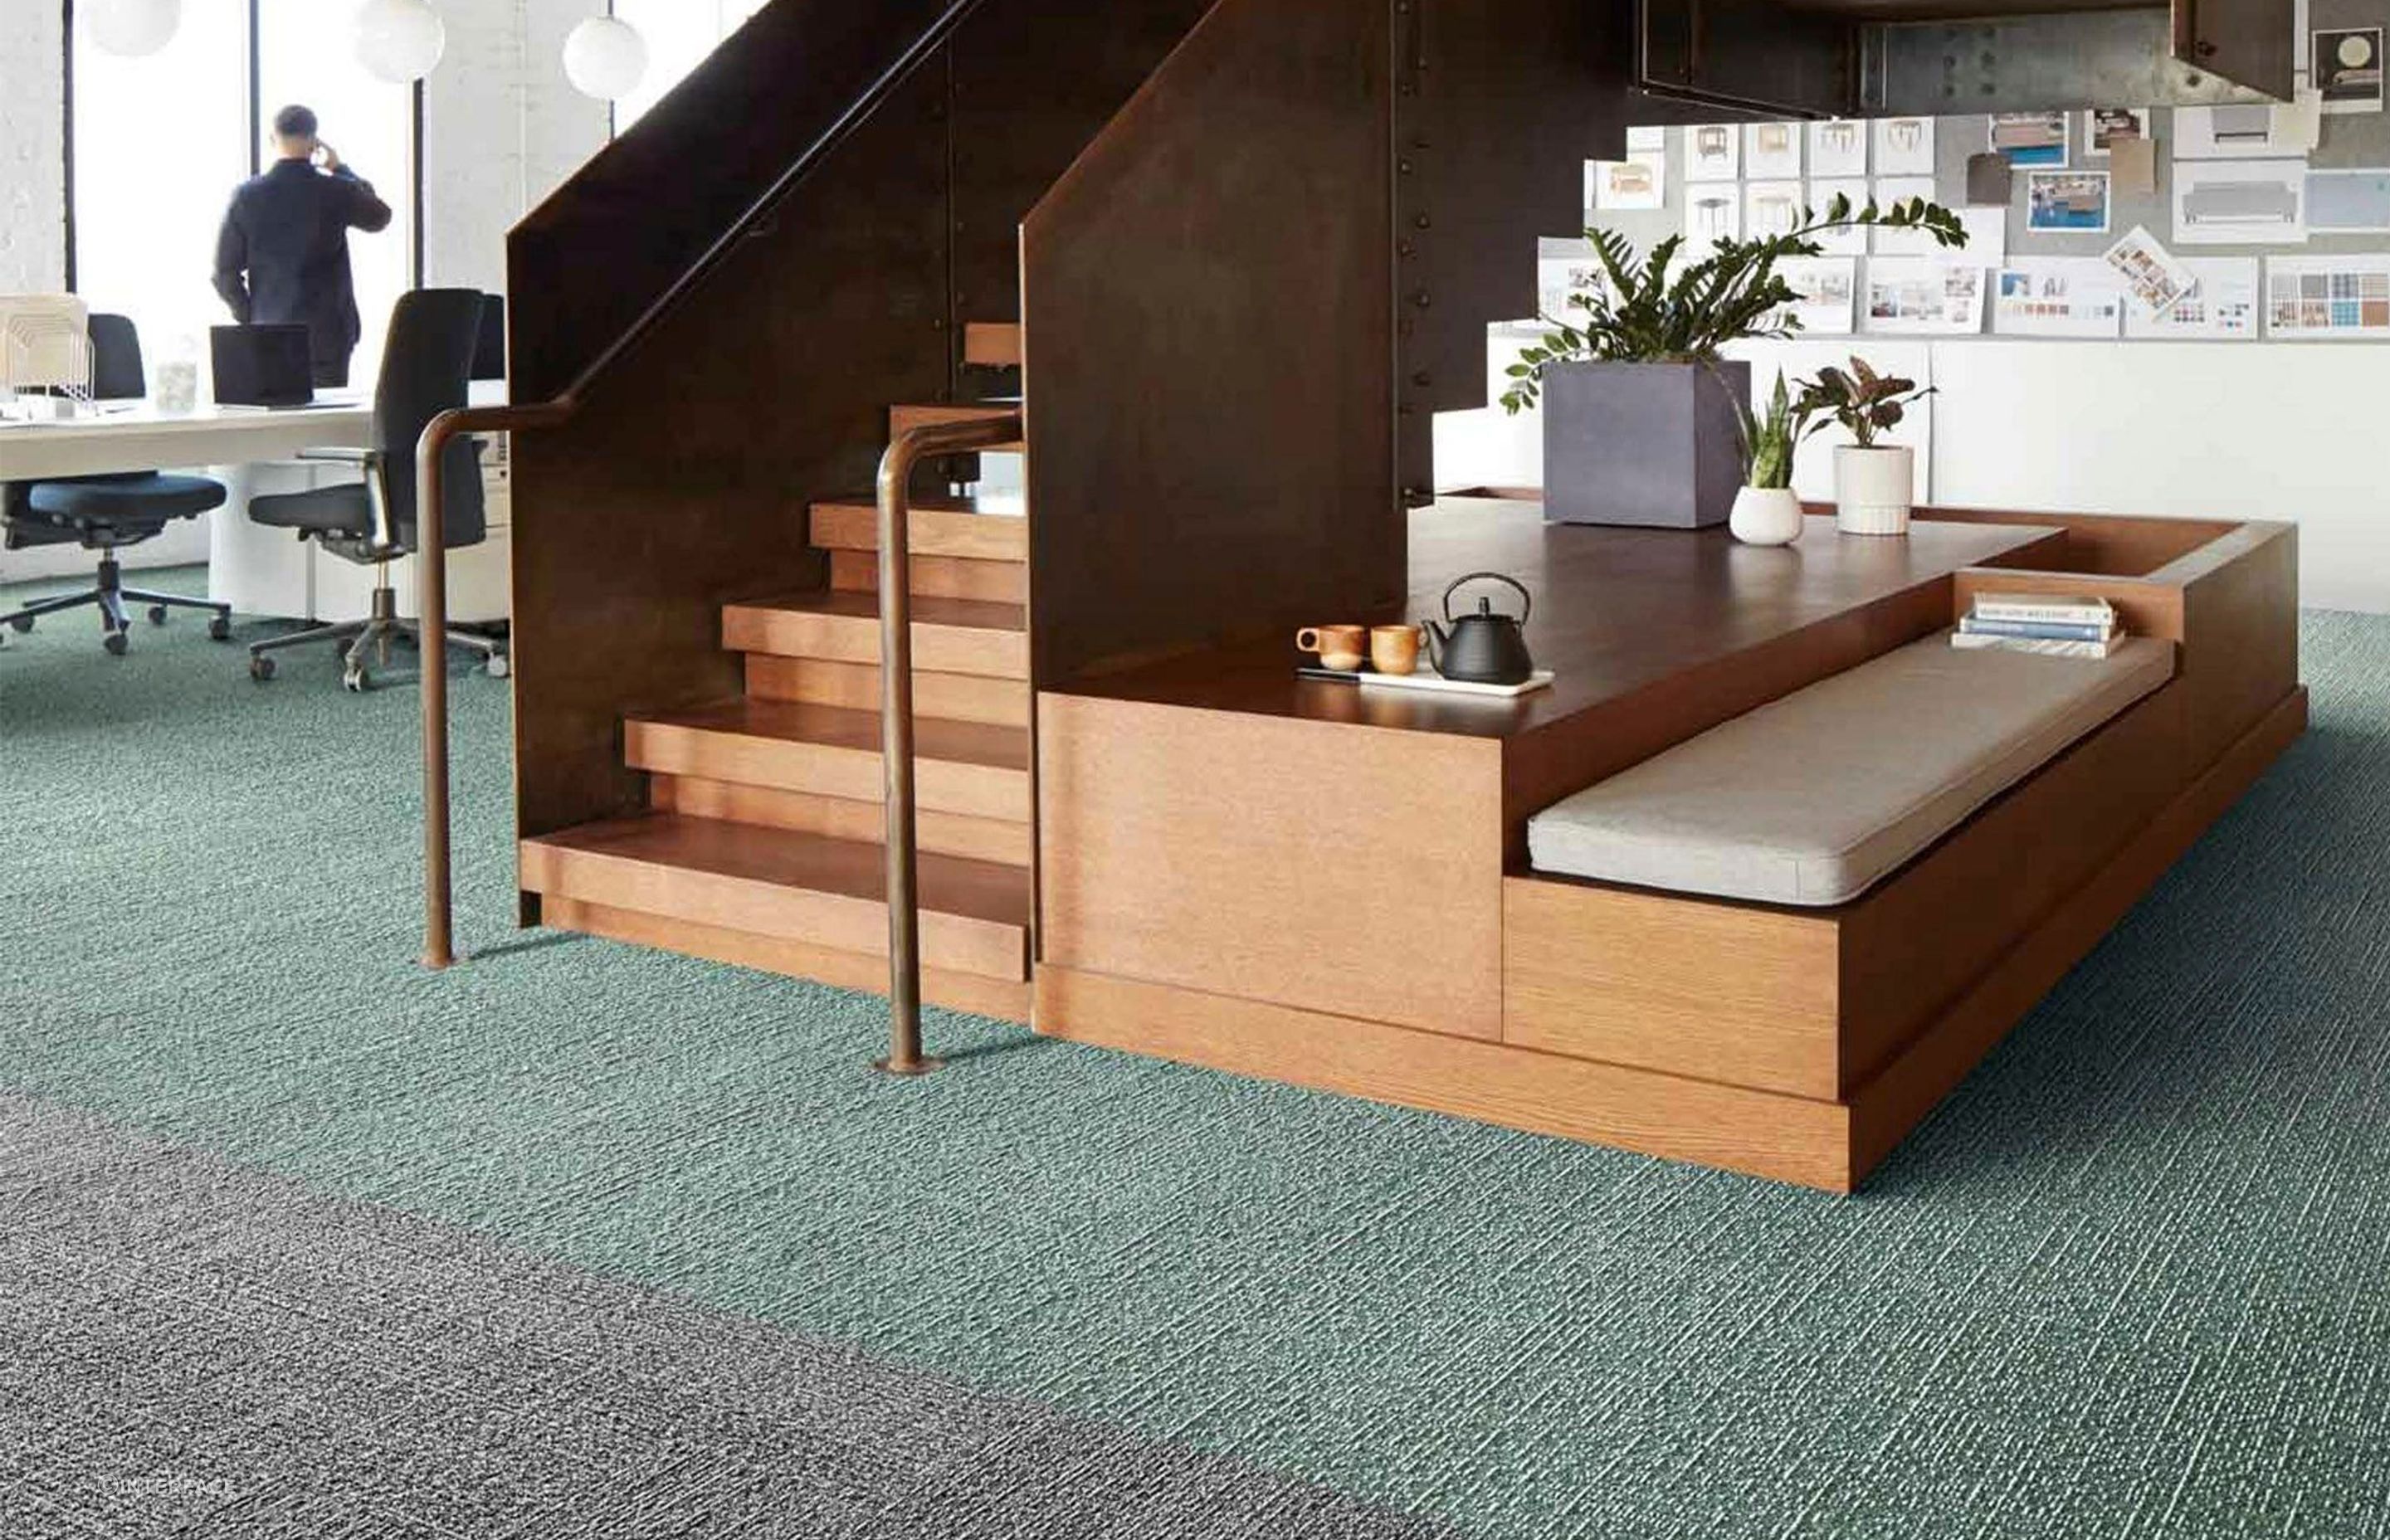 Sashiko Stitch carpet tiles | The Embodied Collection by Interface